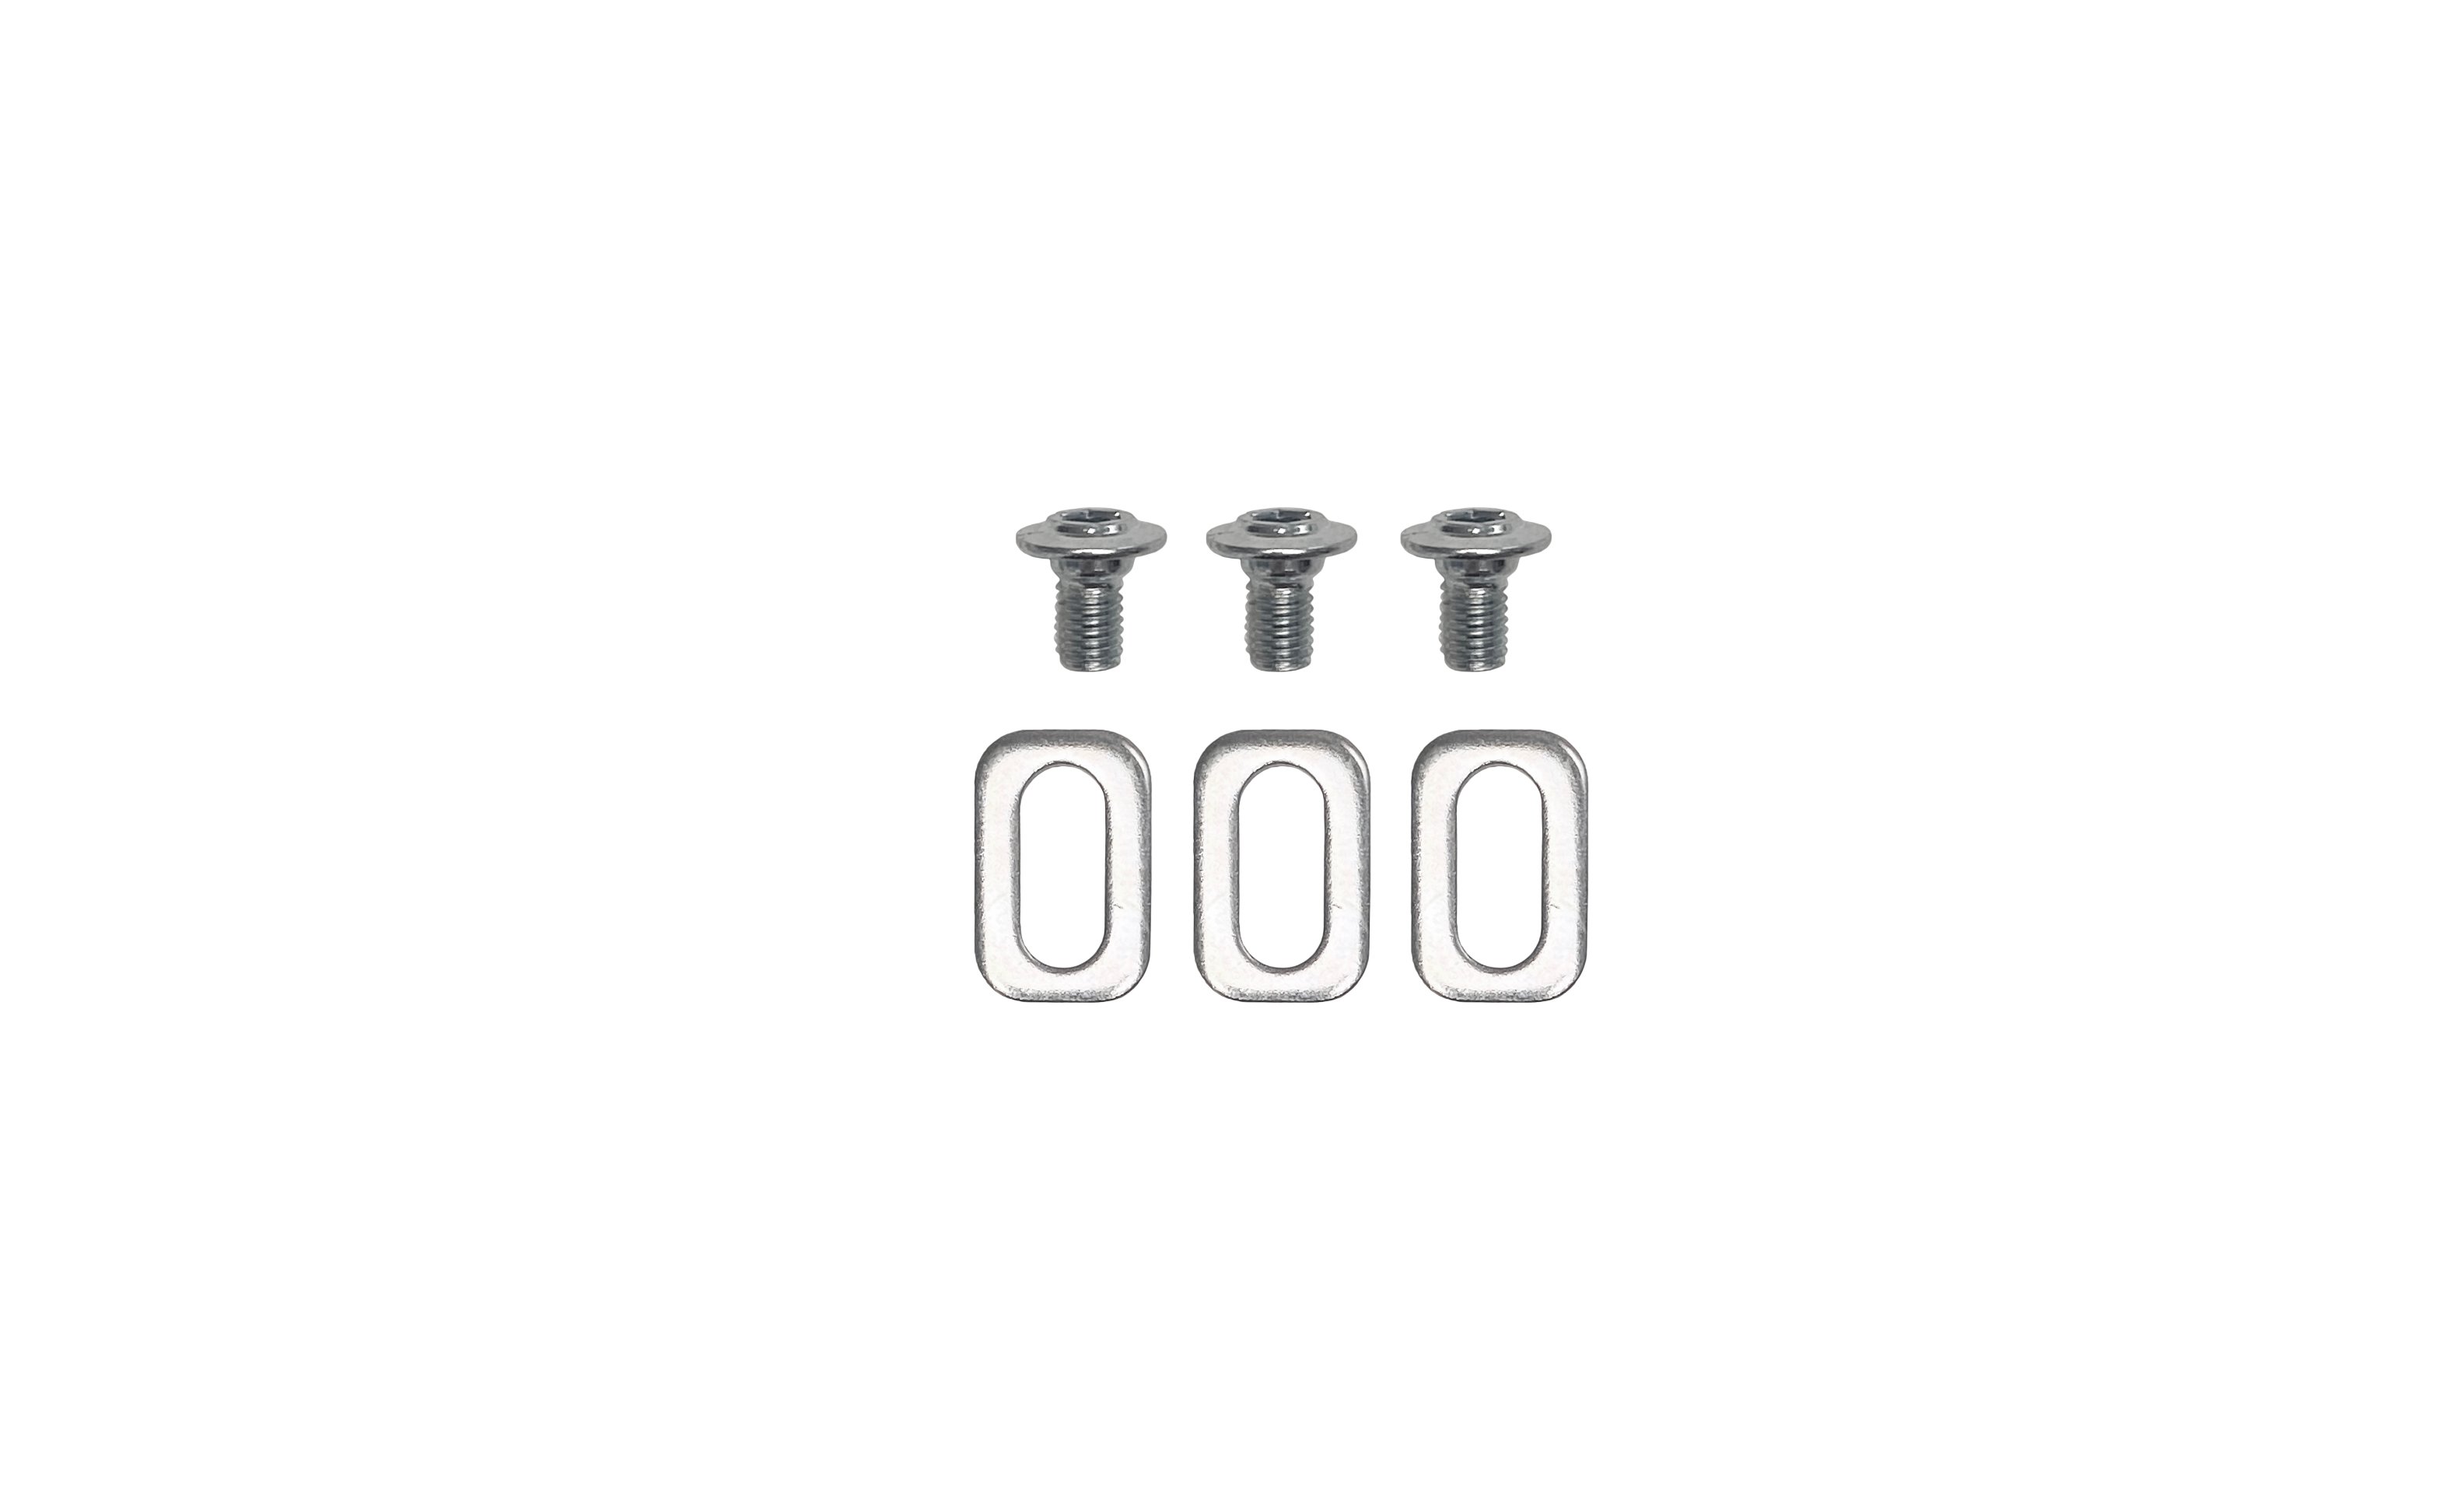 Screw kit -Delta and Keo cleats